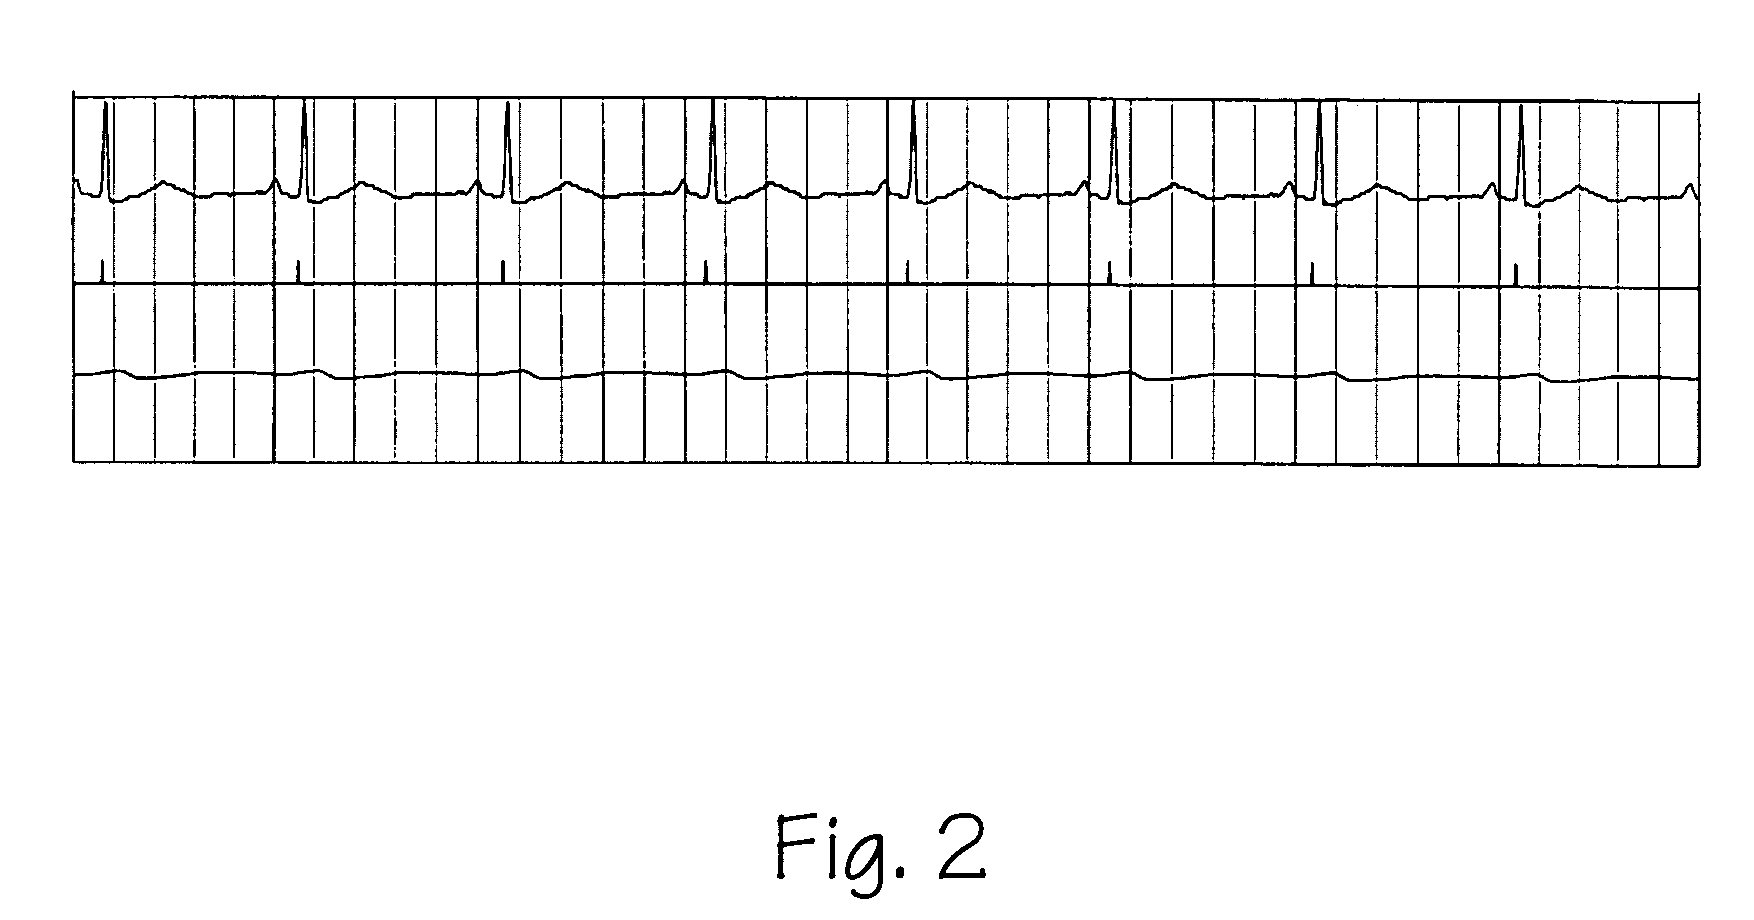 System and method for ICG recording and analysis